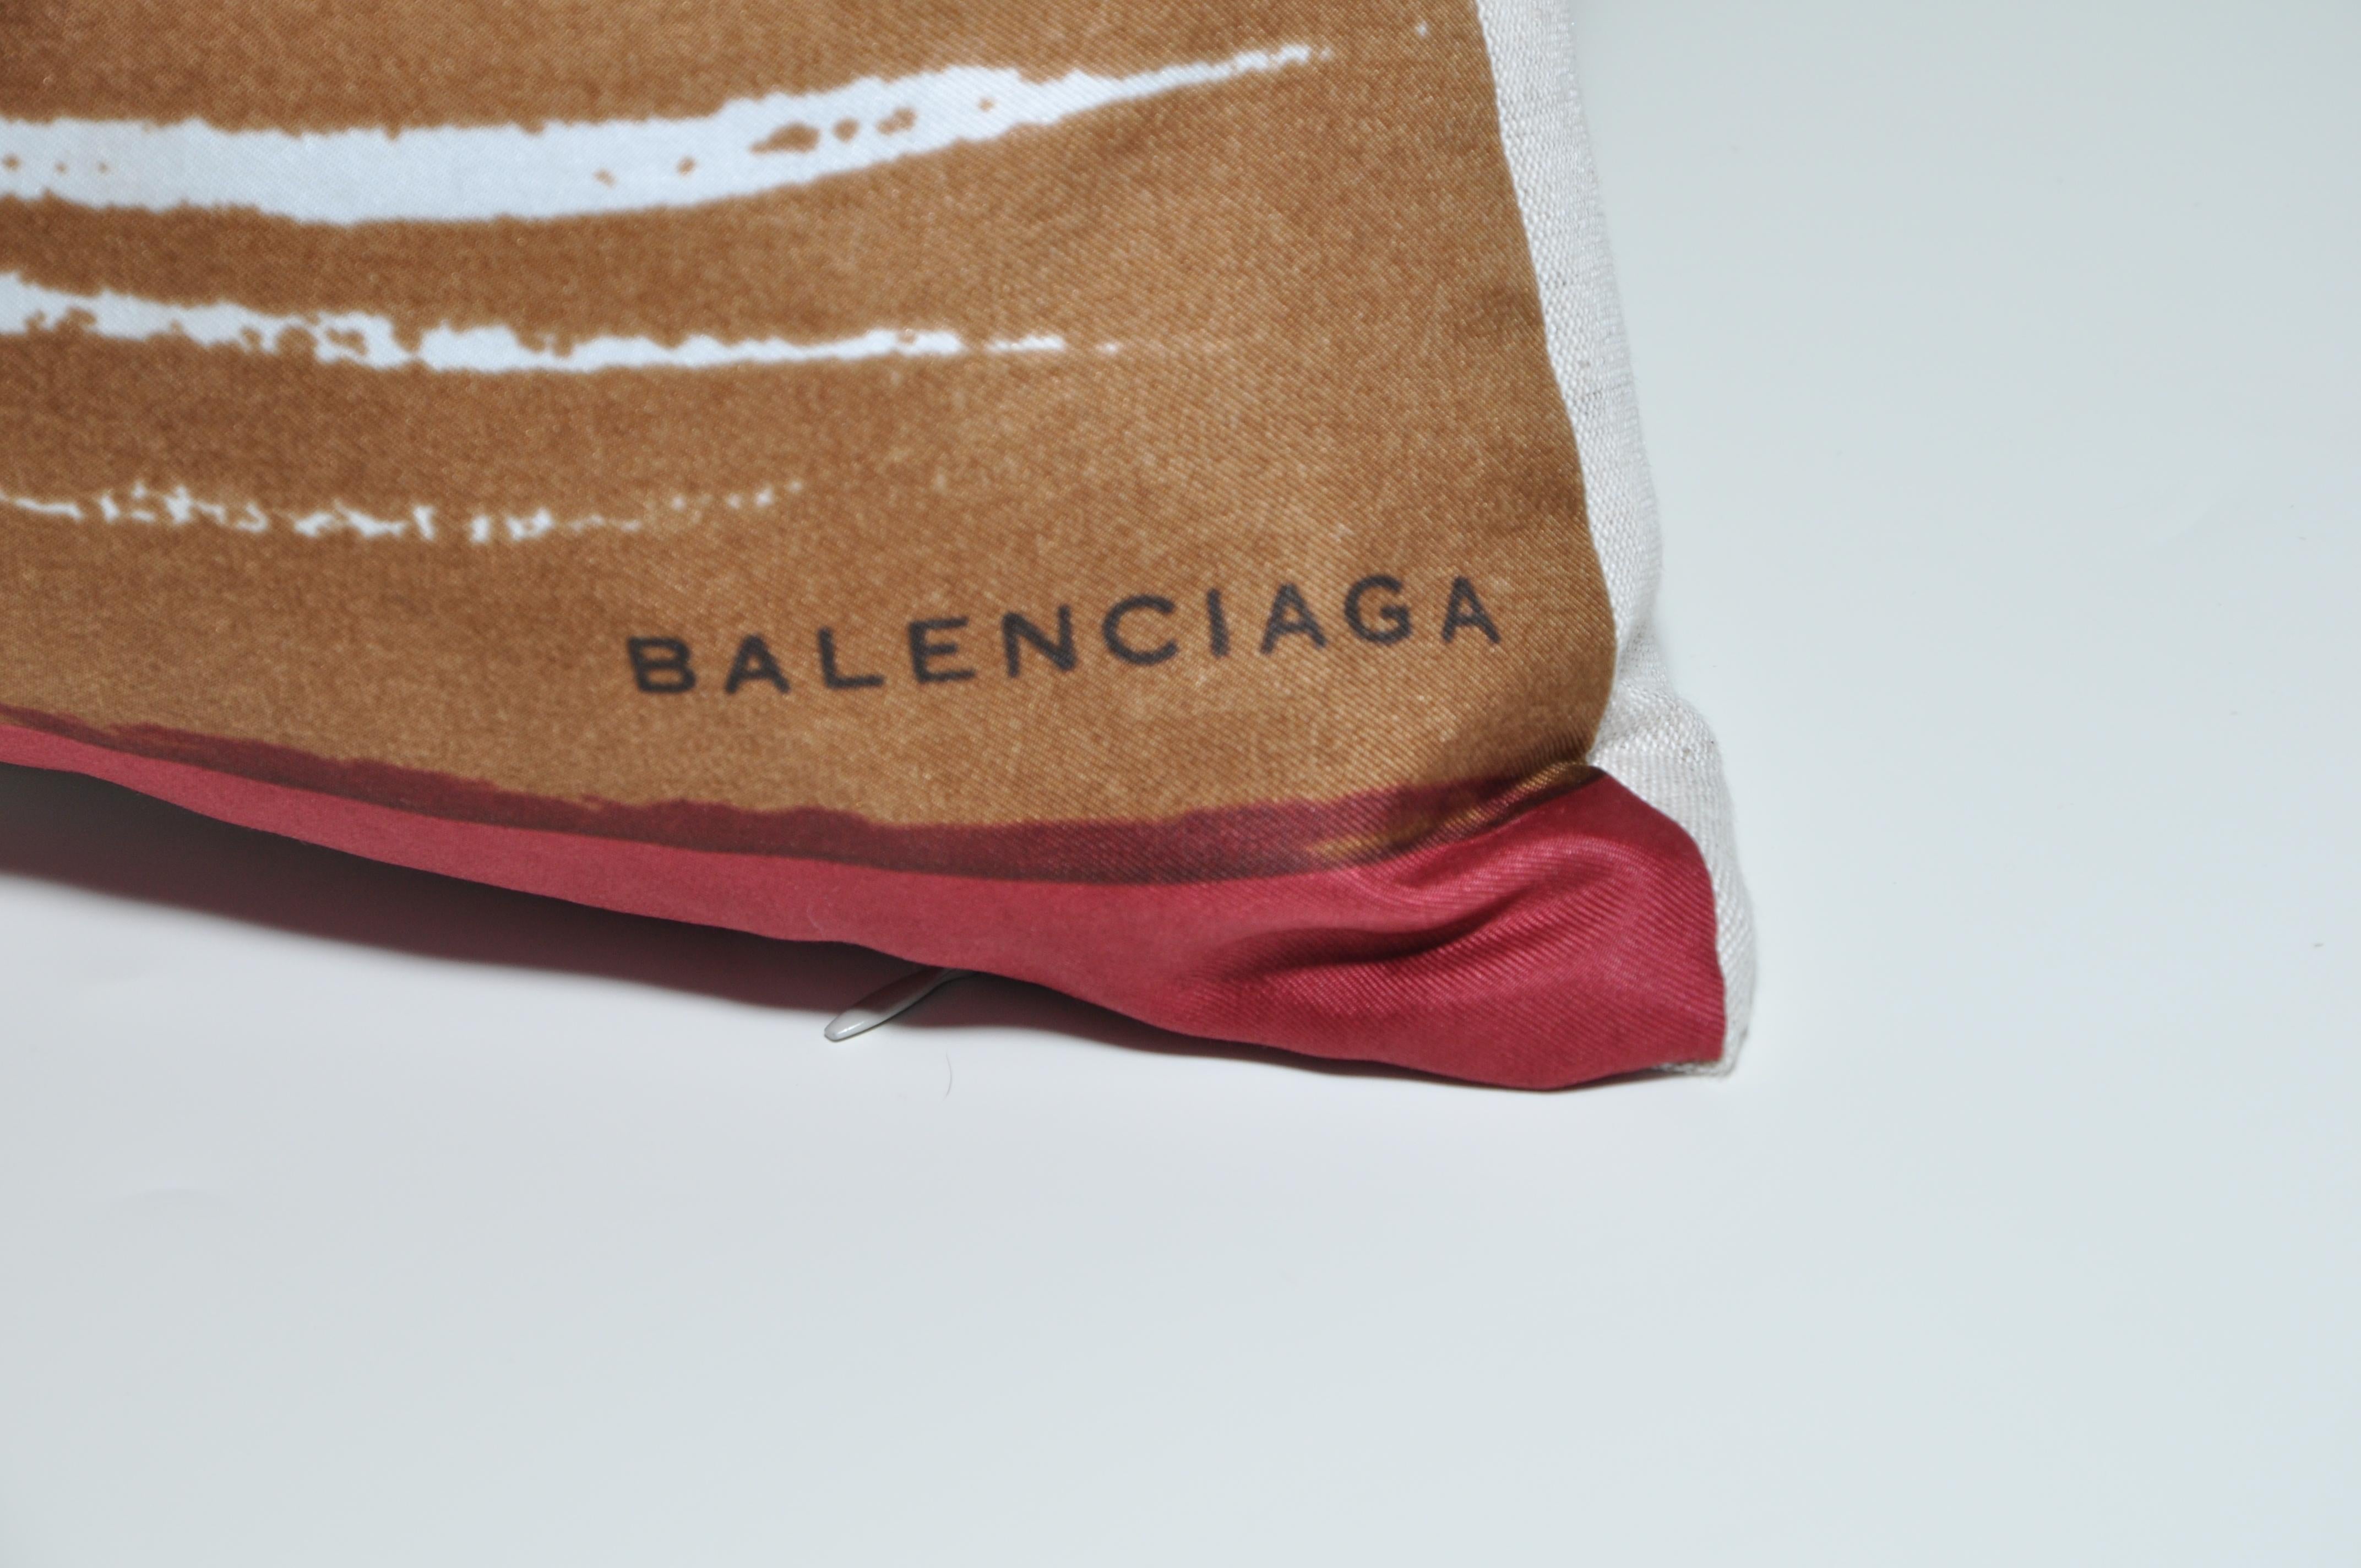 Vintage Balenciaga Silk Fabric and Irish Linen Cushions Pillows Maroon In Good Condition For Sale In Belfast, Northern Ireland